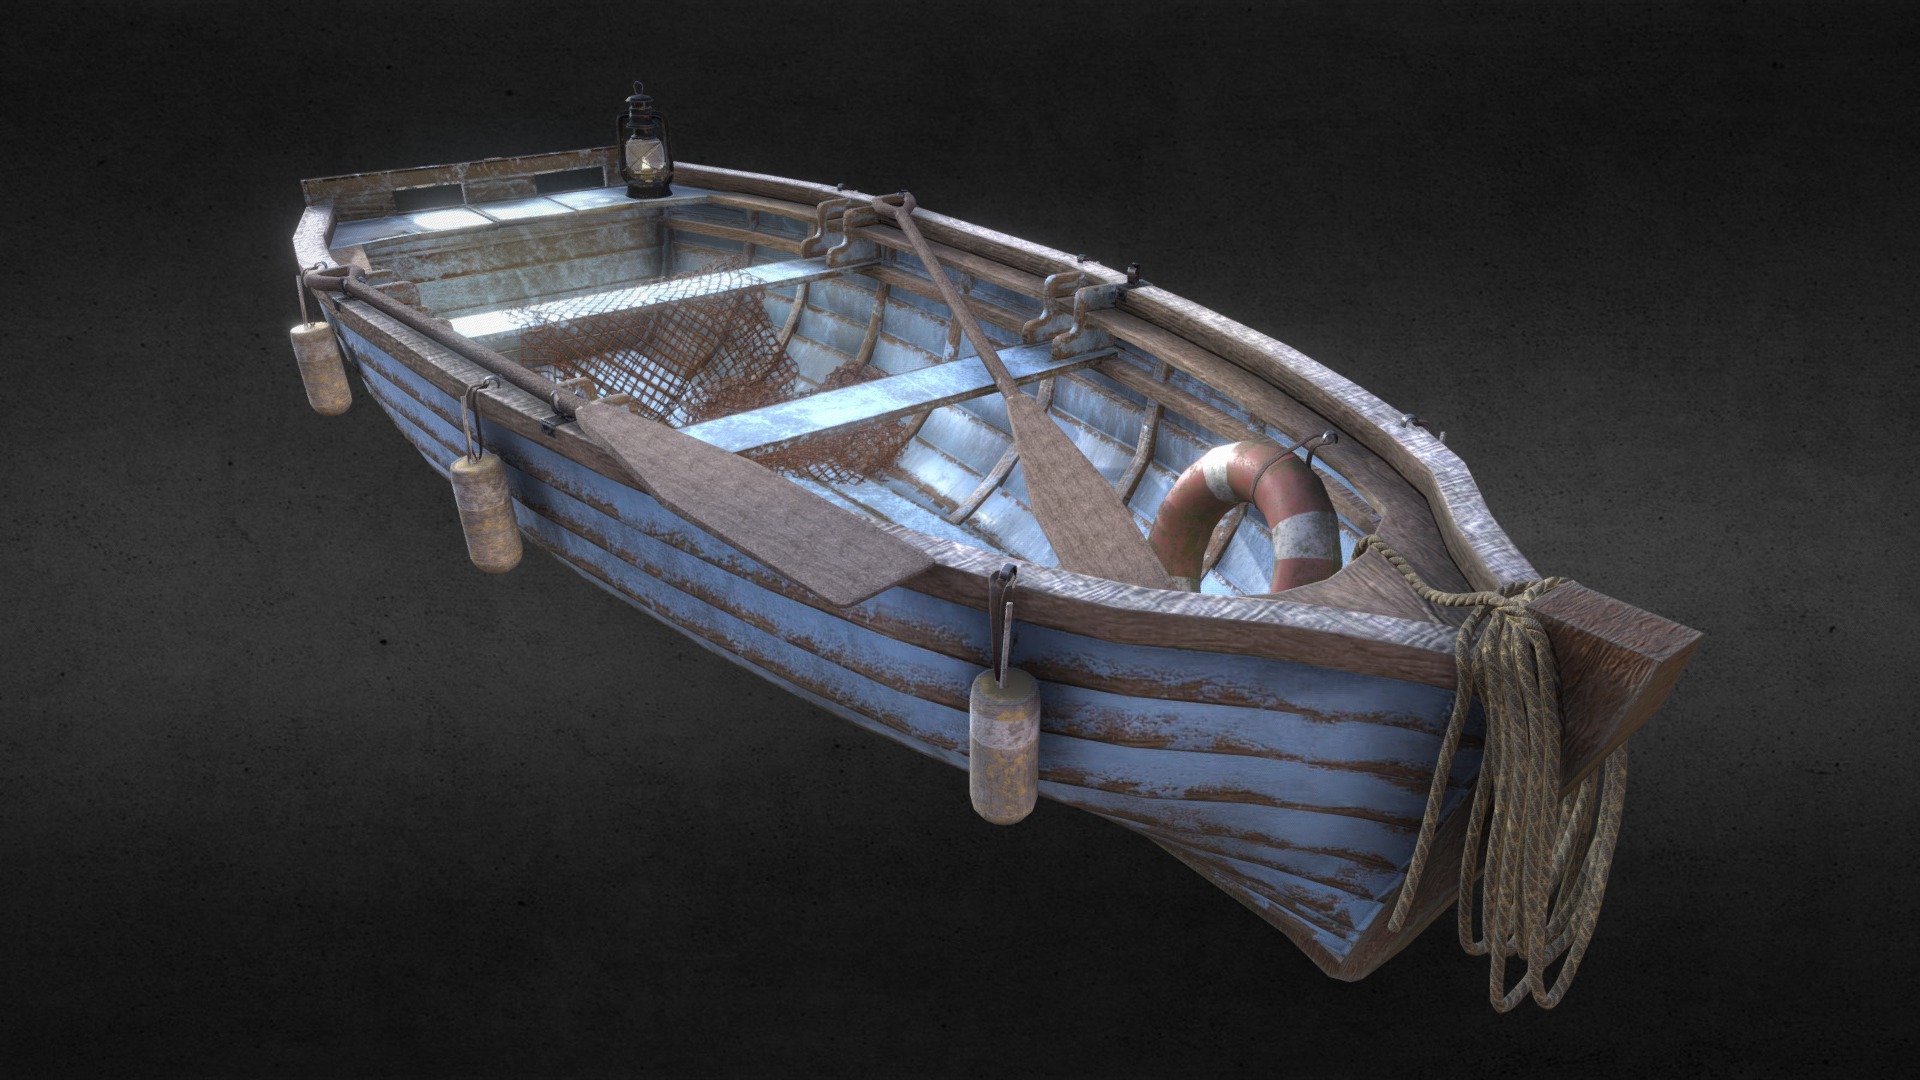 Low poly model of fishing boat with net, buoys, rope, oars and gas lamp 3d model